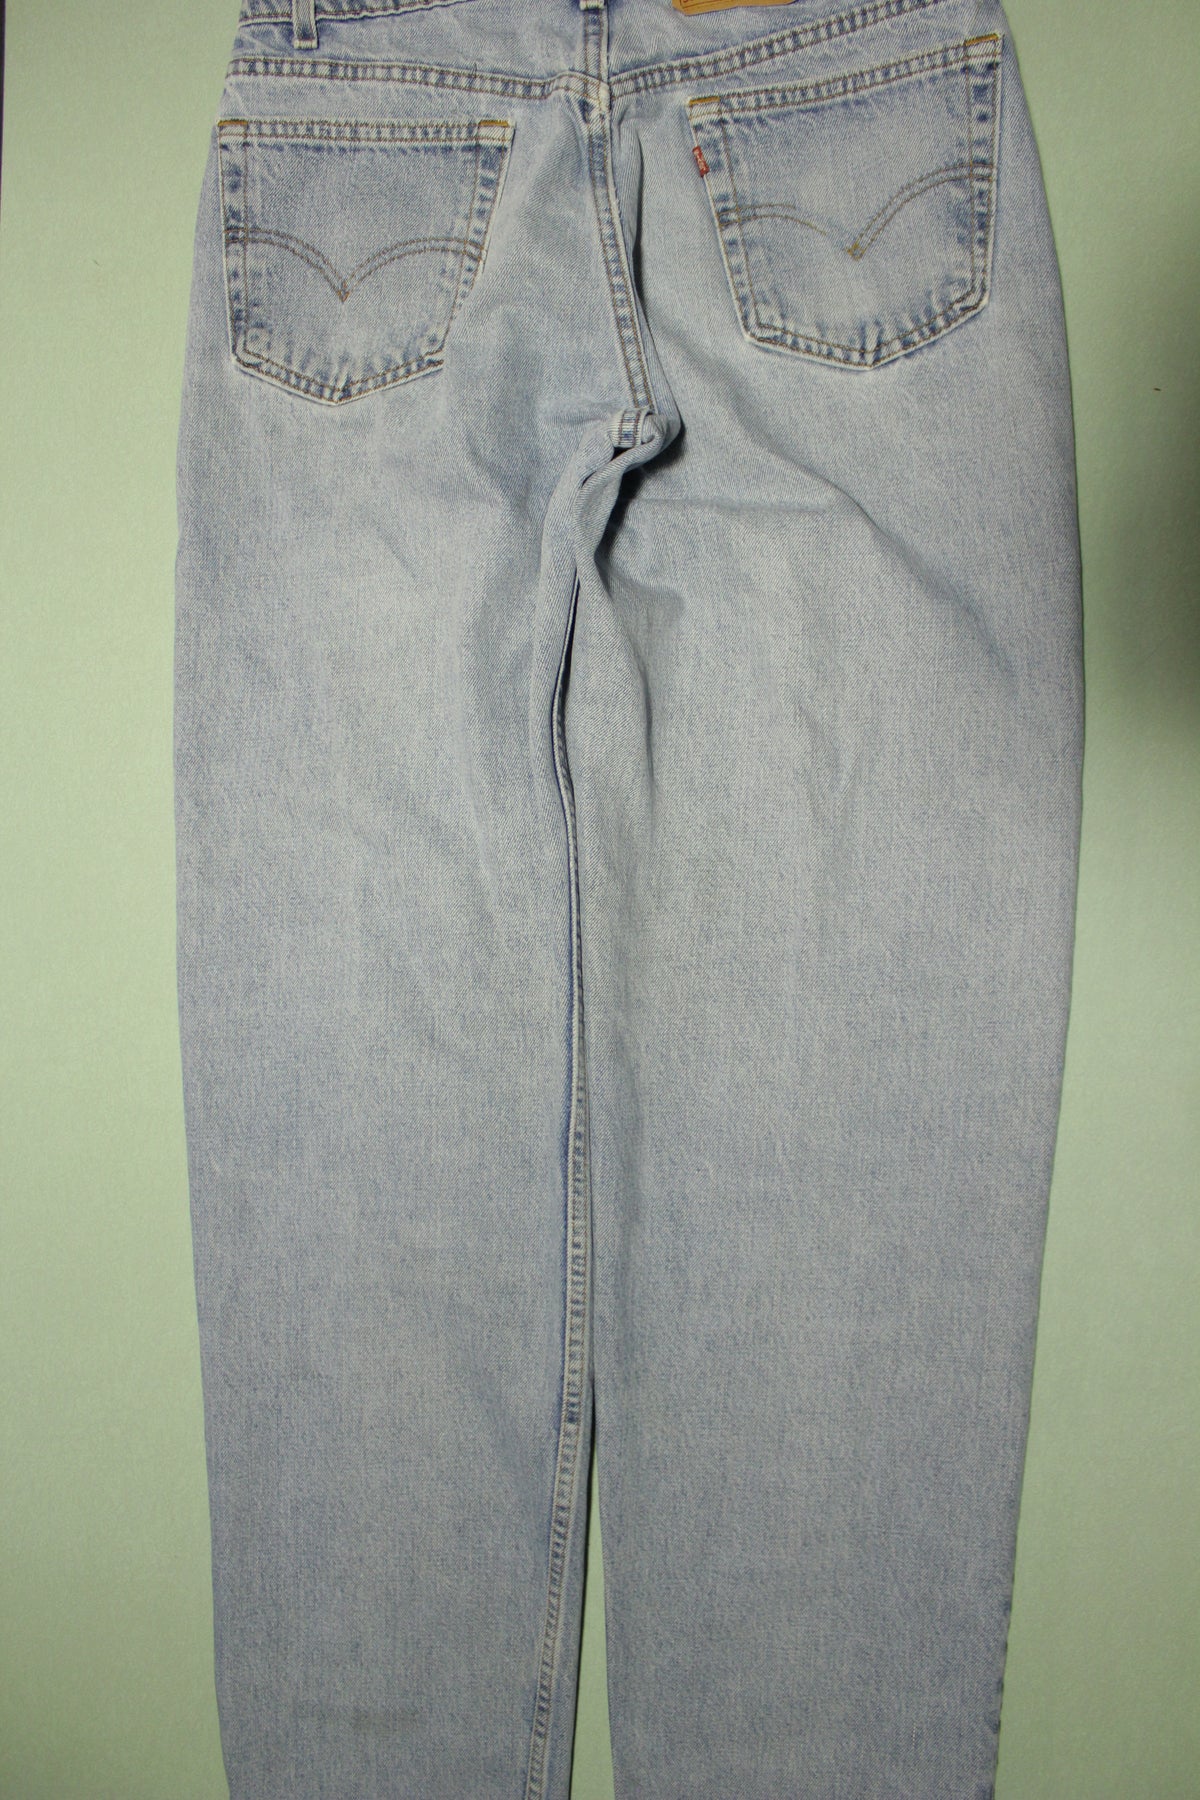 90s Levis 555 Relaxed Fit Straight Leg Jeans. Vintage Grunge Punk Made in USA 34x34